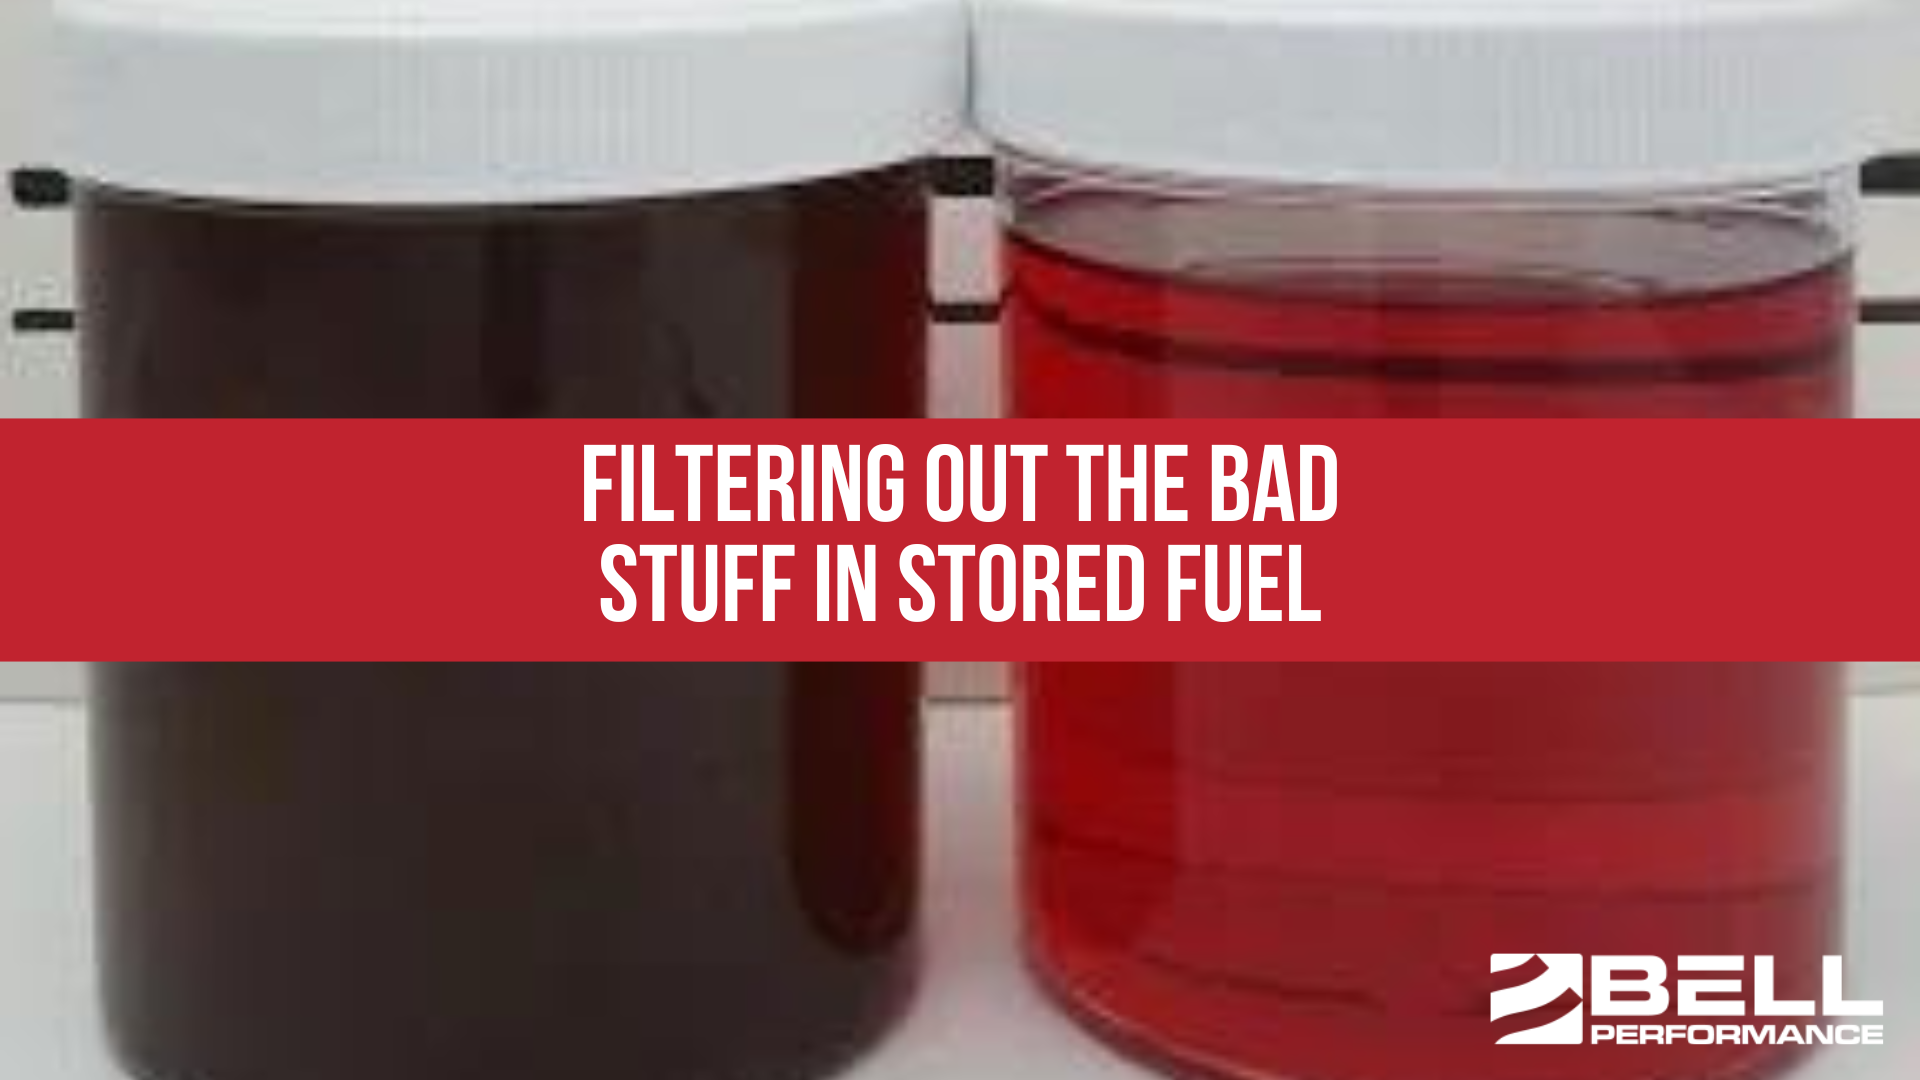 Filtering out the bad stuff in stored fuel